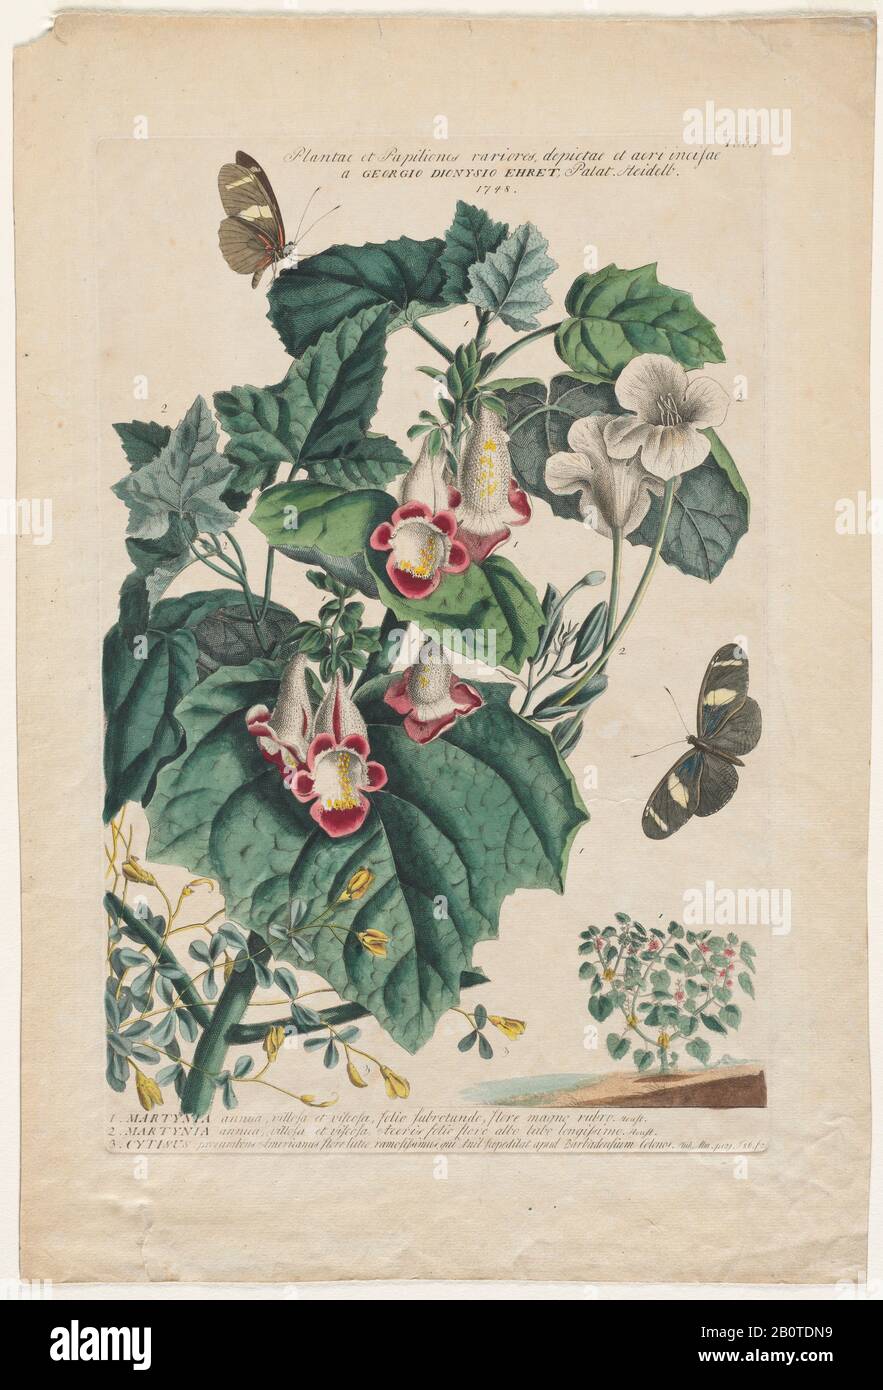 Martynia Engraving, hand-colored print of plants and butterflies from Plantae et papiliones rariores (rare plants and butterflies) by Ehret, Georg Dionysius, 1708-1770 Published in London in 1748 Stock Photo